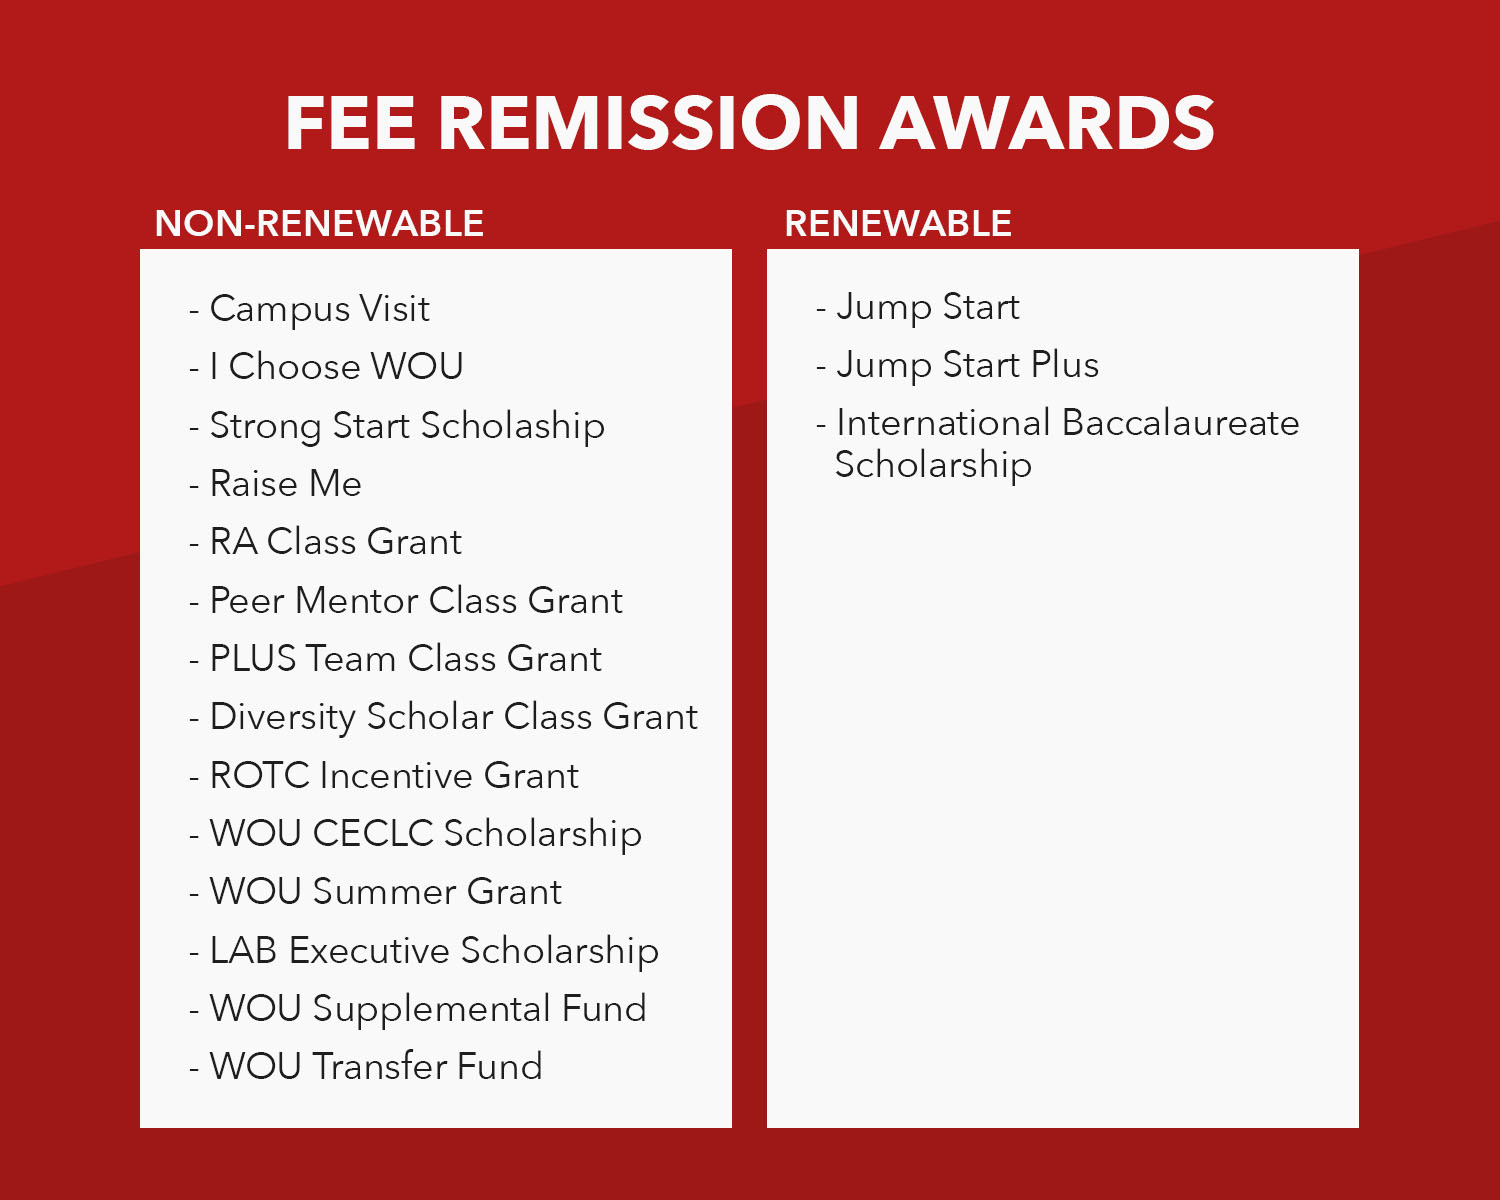 WOU internal scholarships face $1.5 million “right-sizing”